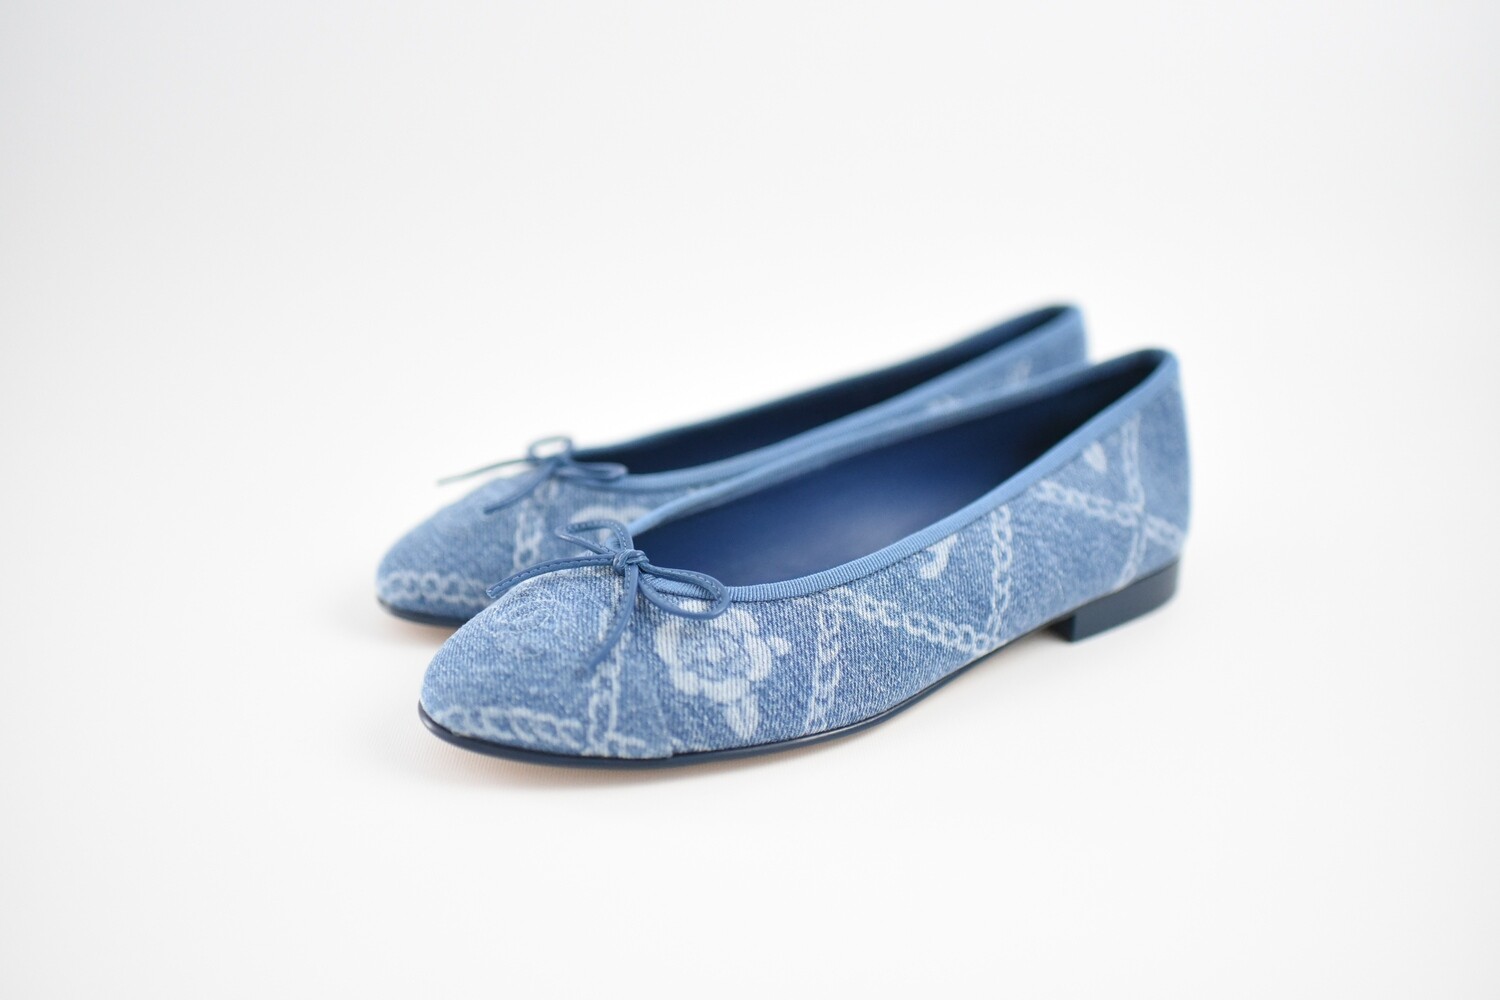 Chanel Ballet Flats, Blue Denim with Camellia Print, Size 38.5, New in Box  GA001